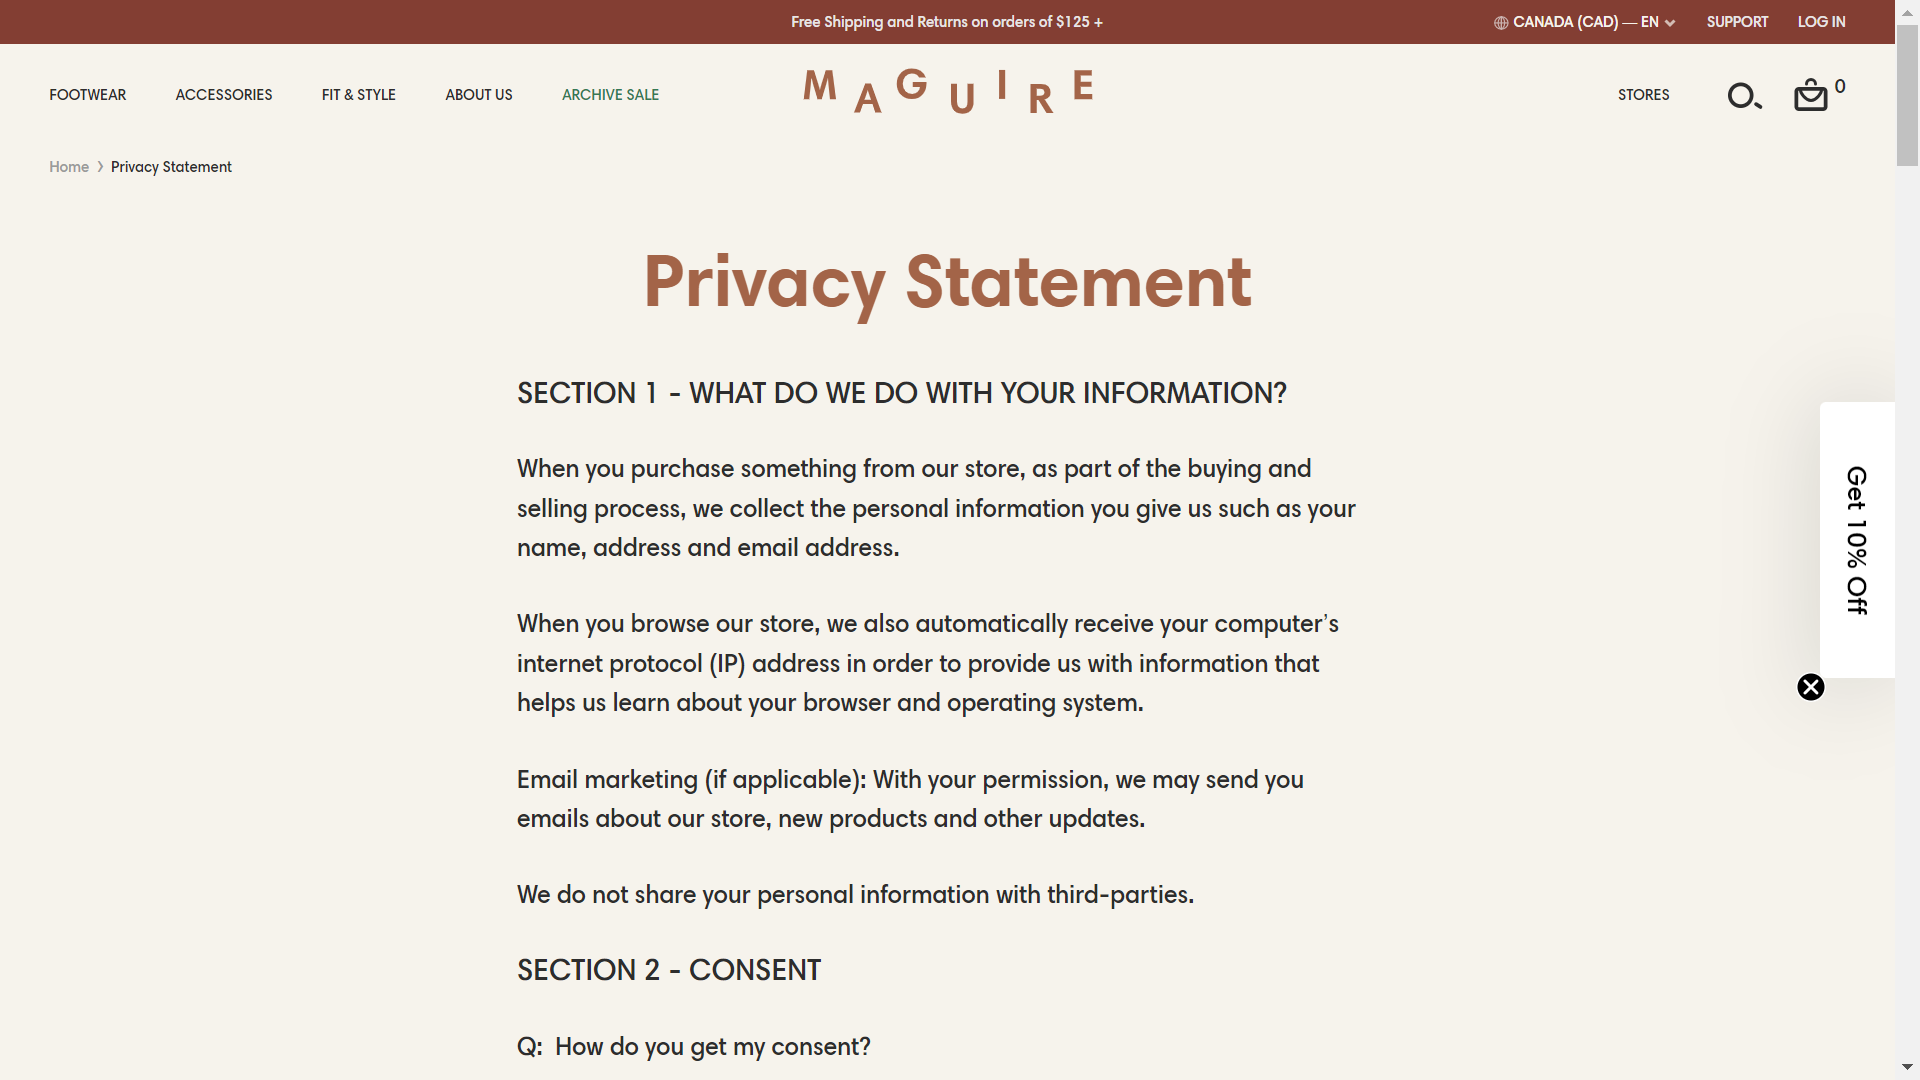 Terms and Conditions and Privacy Policy Pages